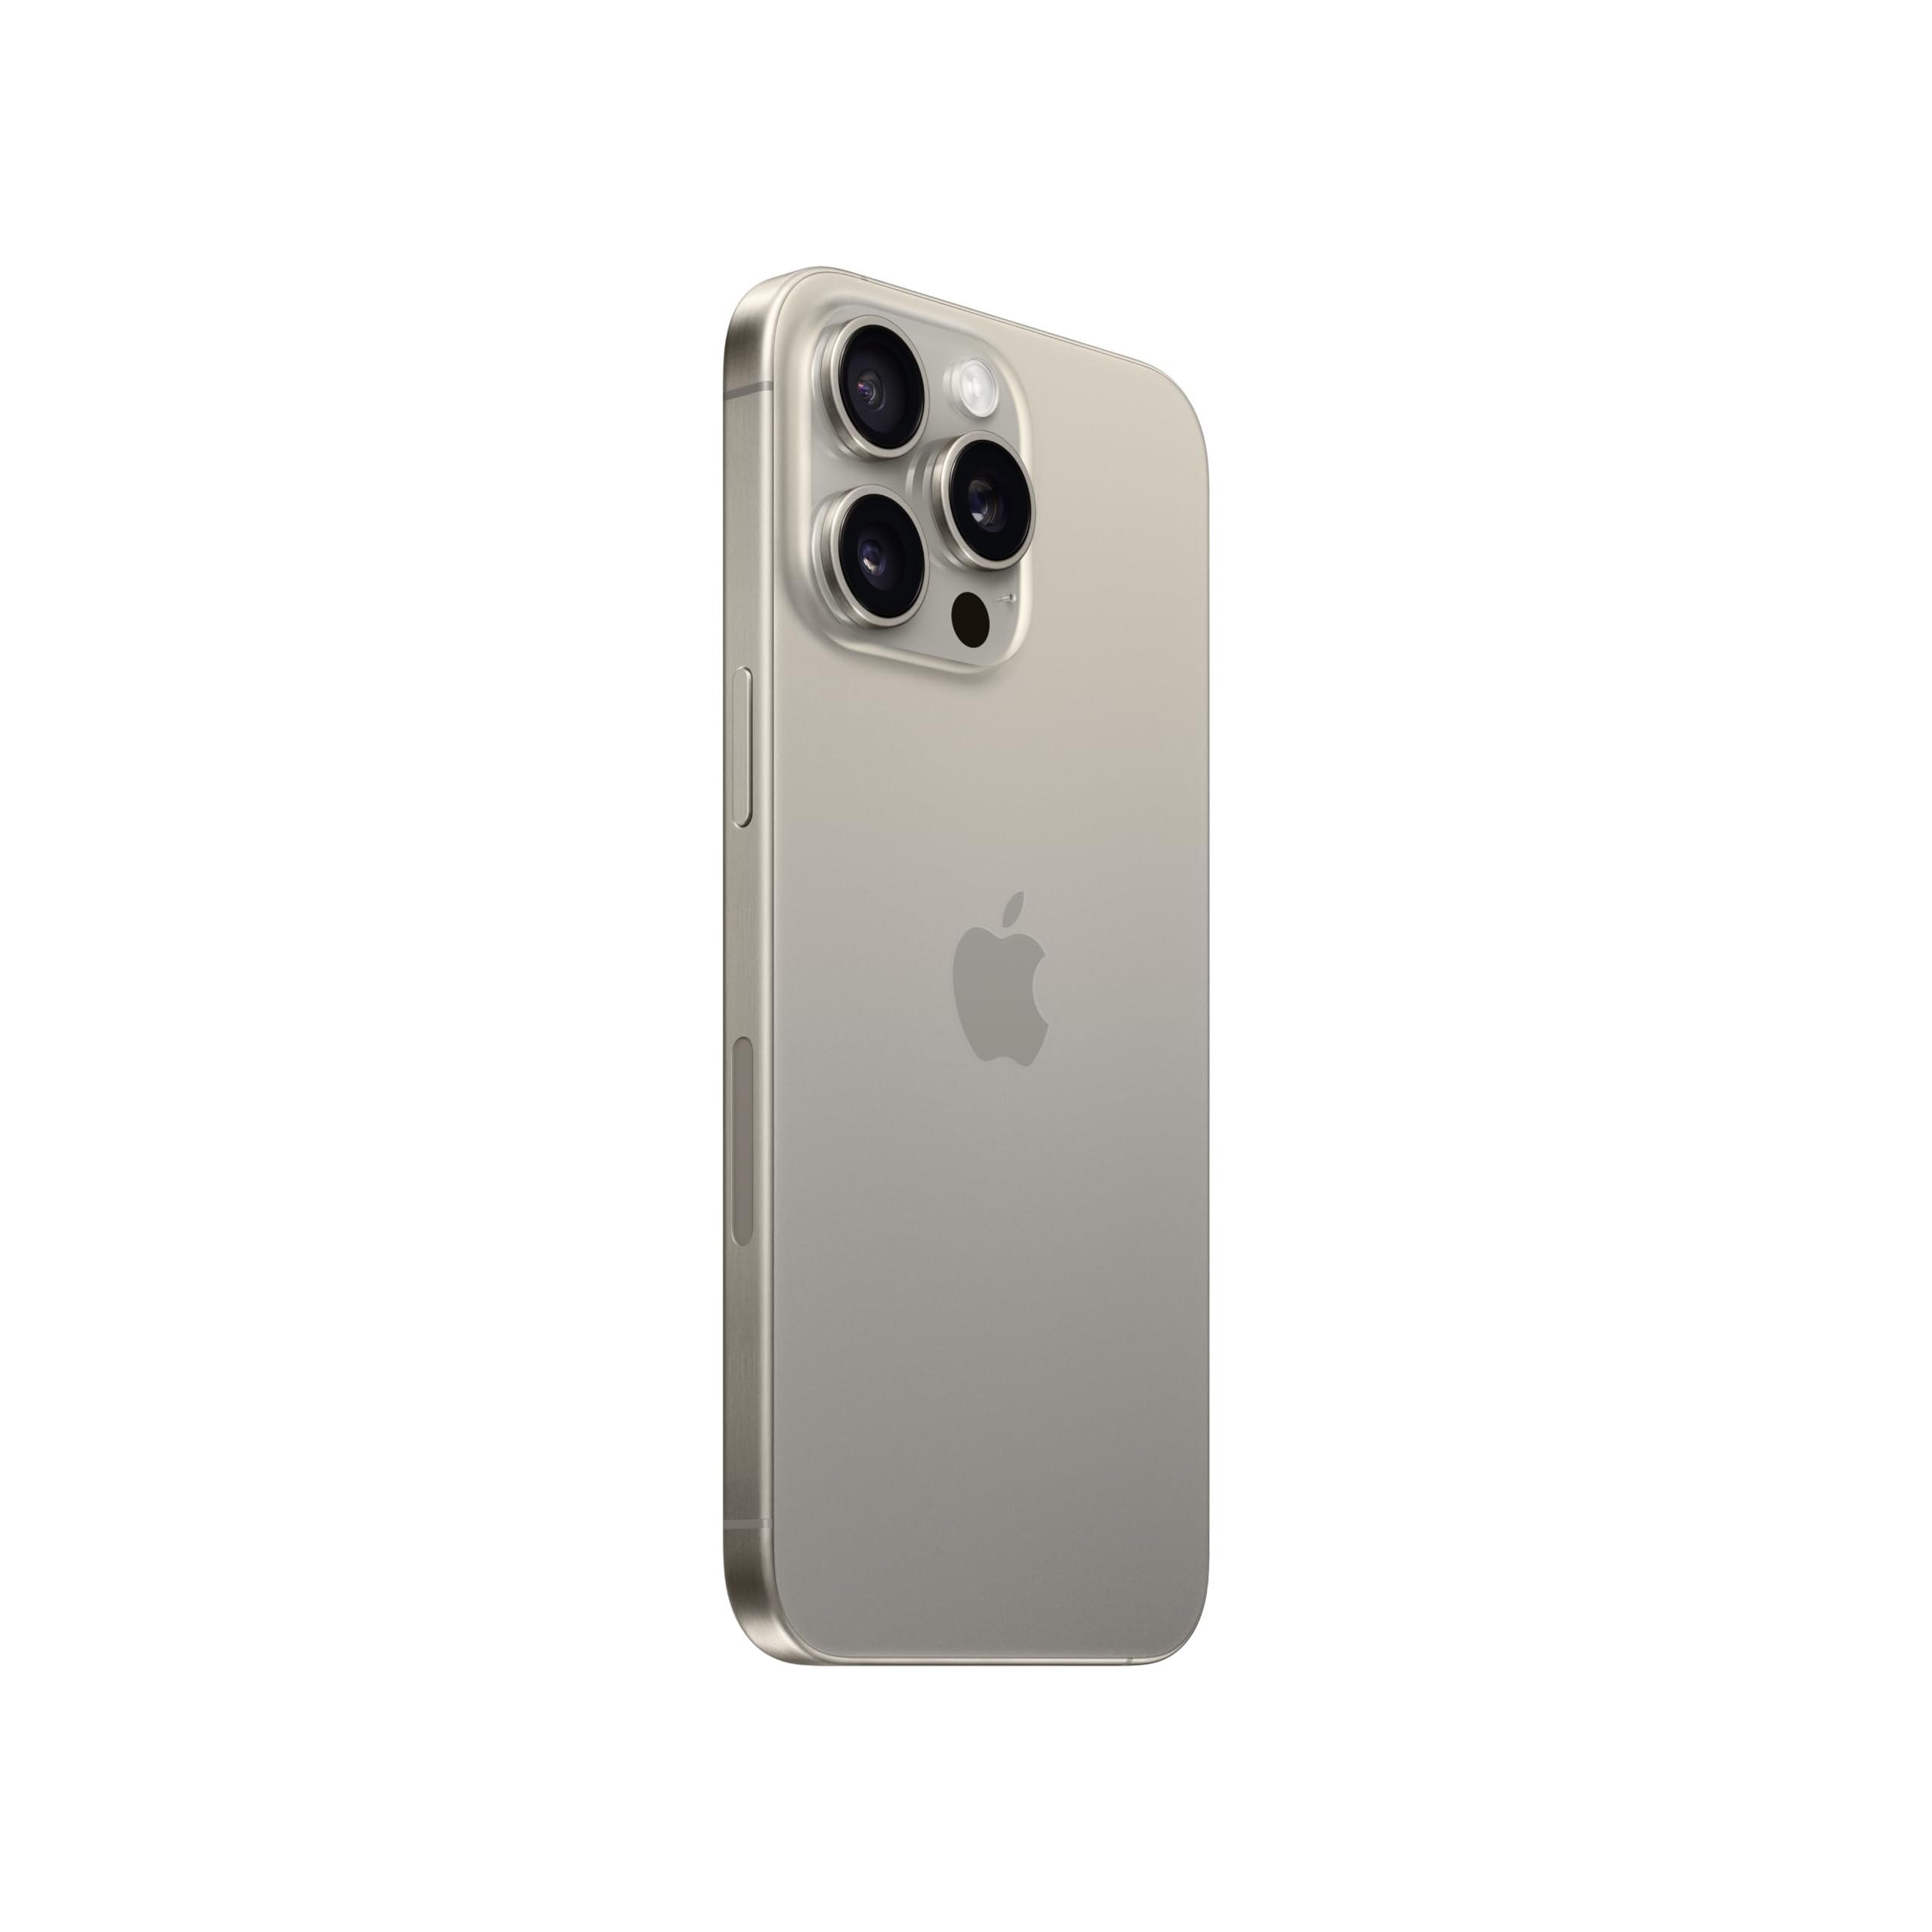 Apple iPhone 15 Pro Max (512 GB) - Natural Titanium | [Locked] | Boost Infinite plan required starting at $60/mo. | Unlimited Wireless | No trade-in needed to start | Get the latest iPhone every year